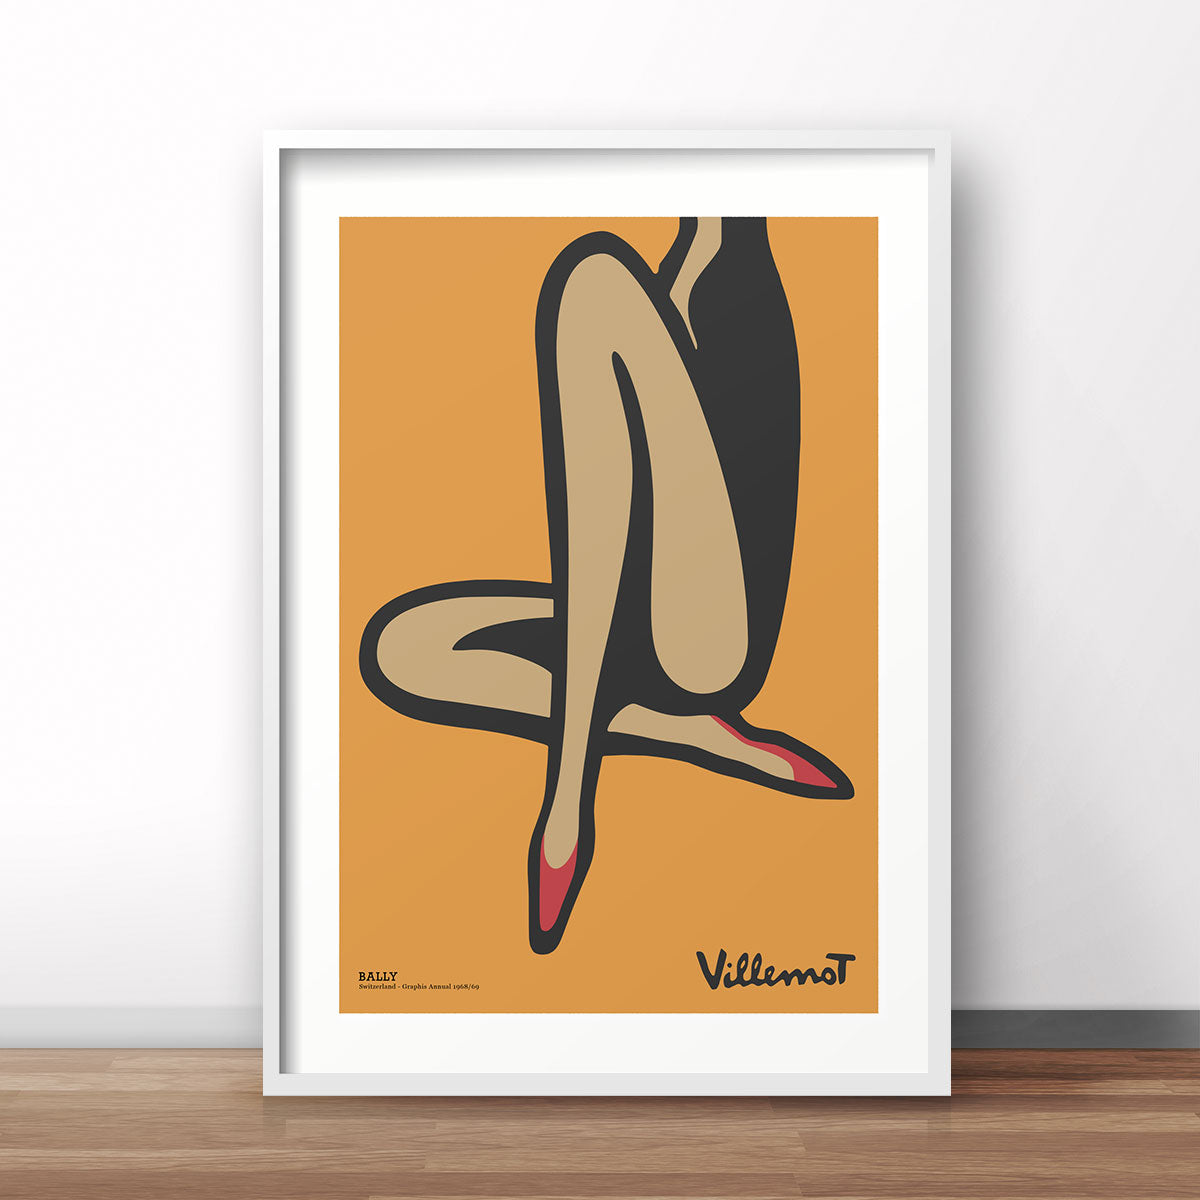 Bally Villemot retro vintage advertising poster print from Places We Luv